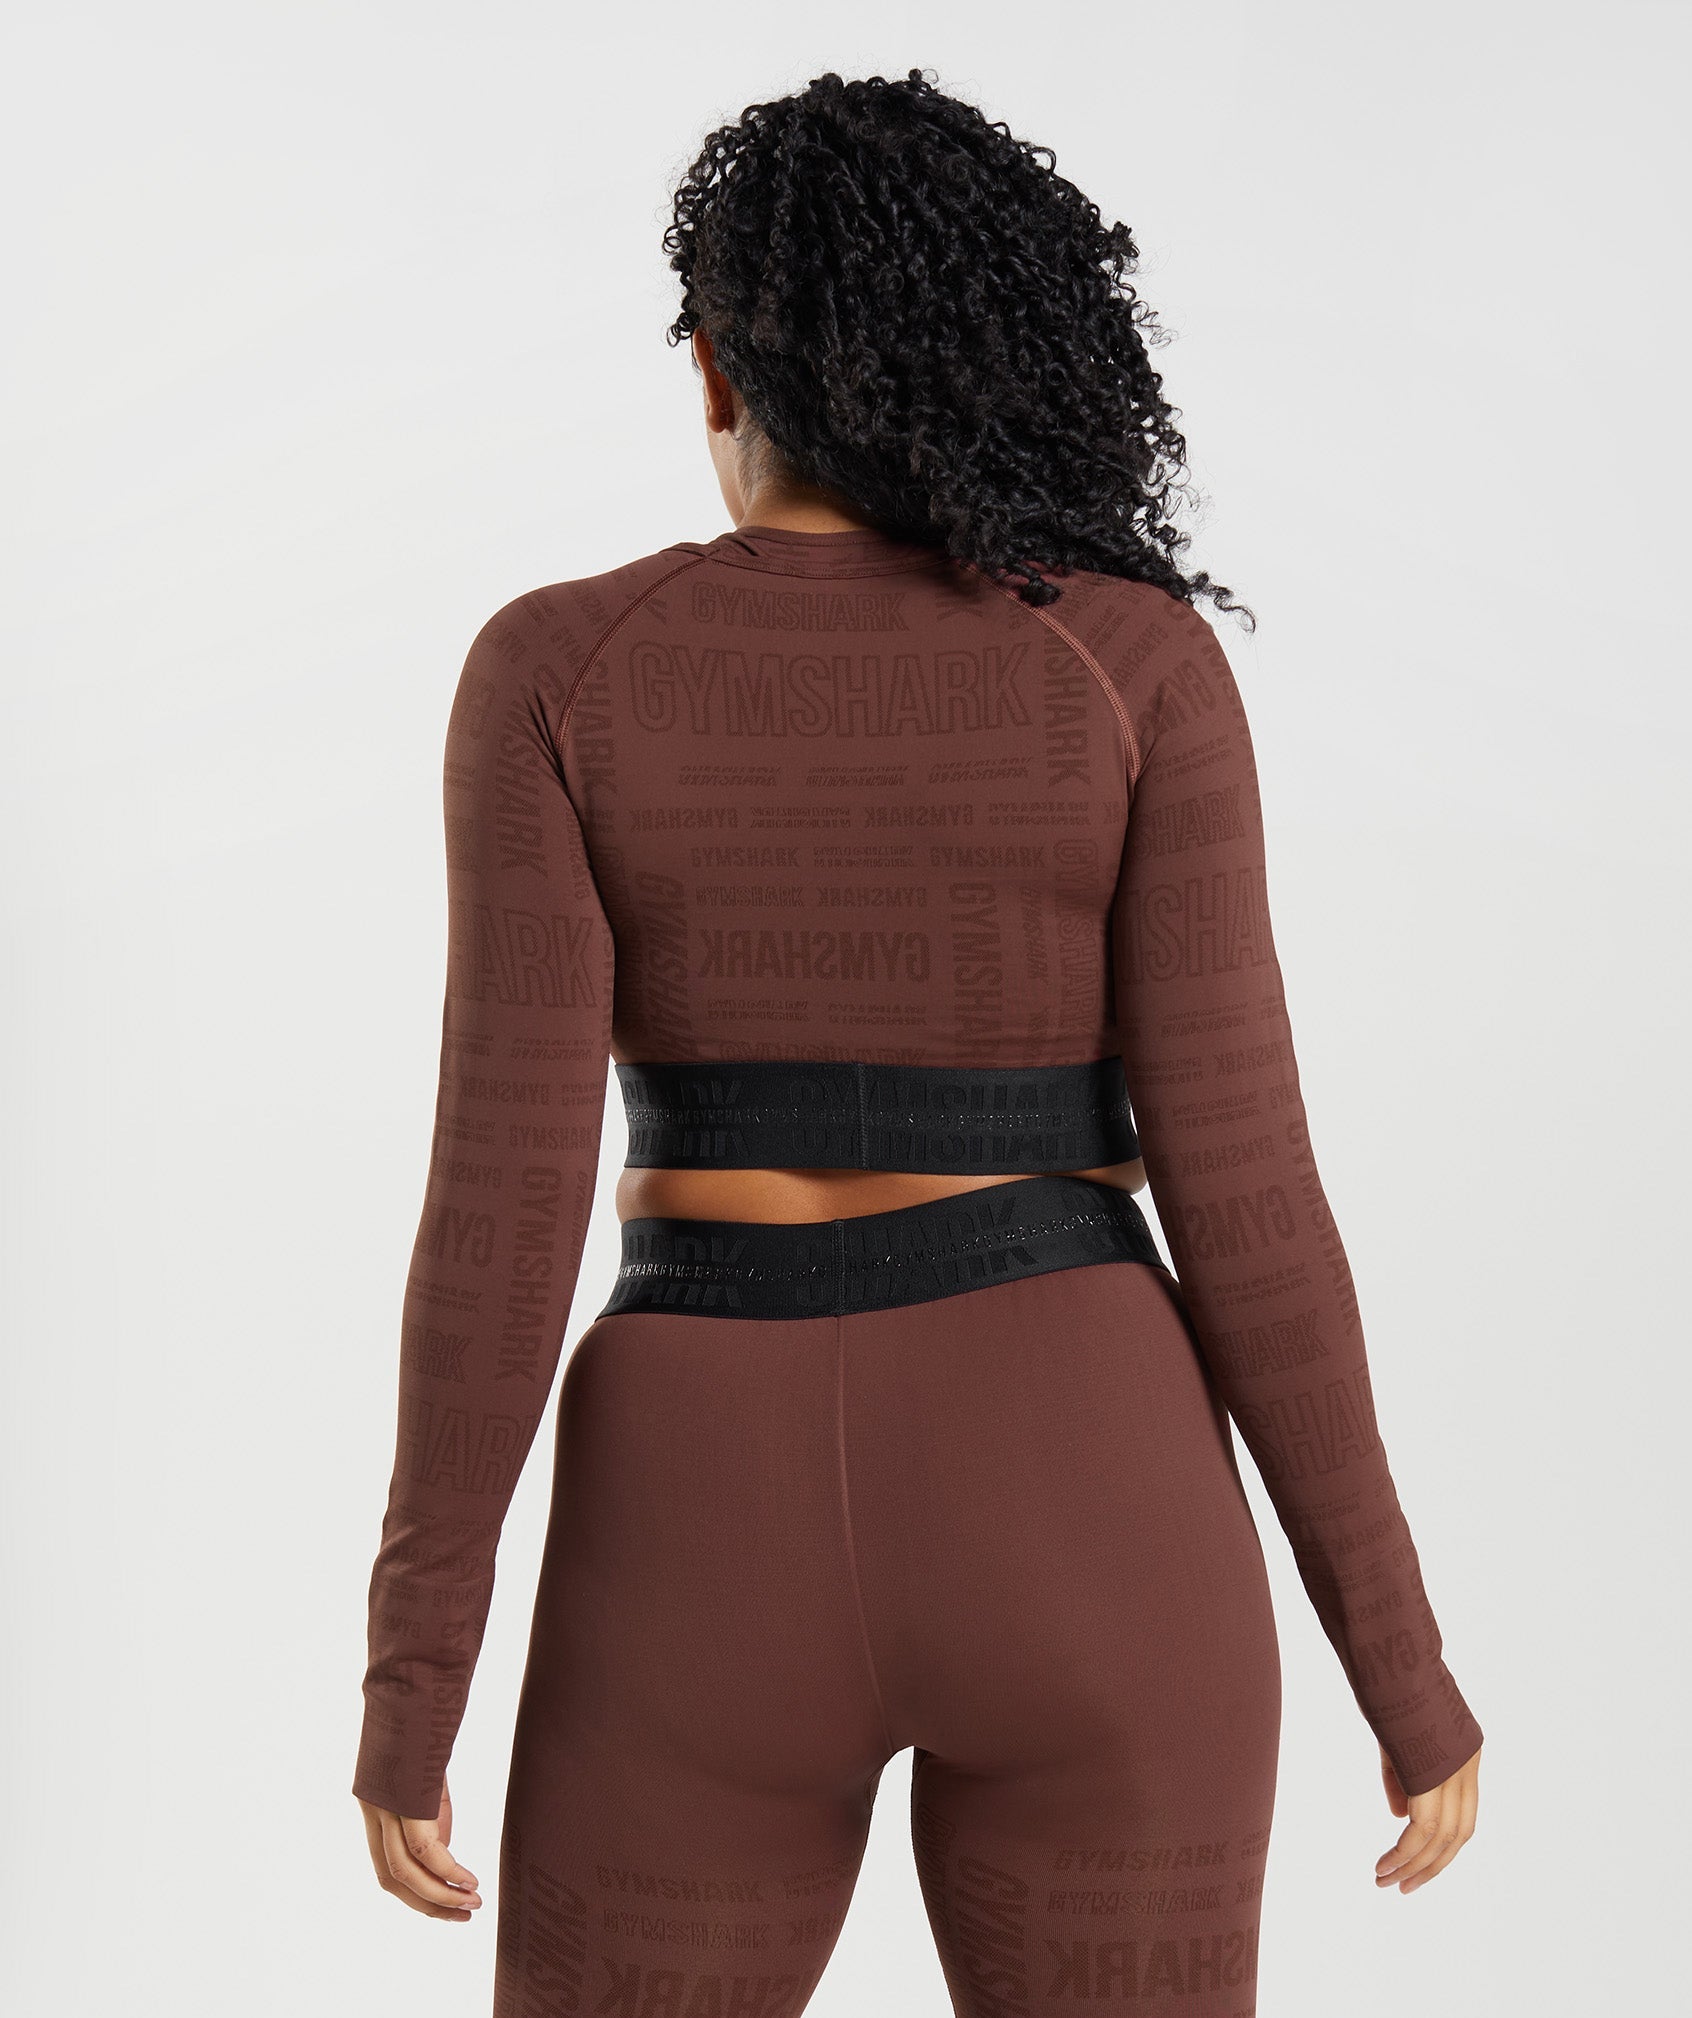 Gymshark Crop Top Brown Size M - $33 (26% Off Retail) New With Tags - From  Lucy